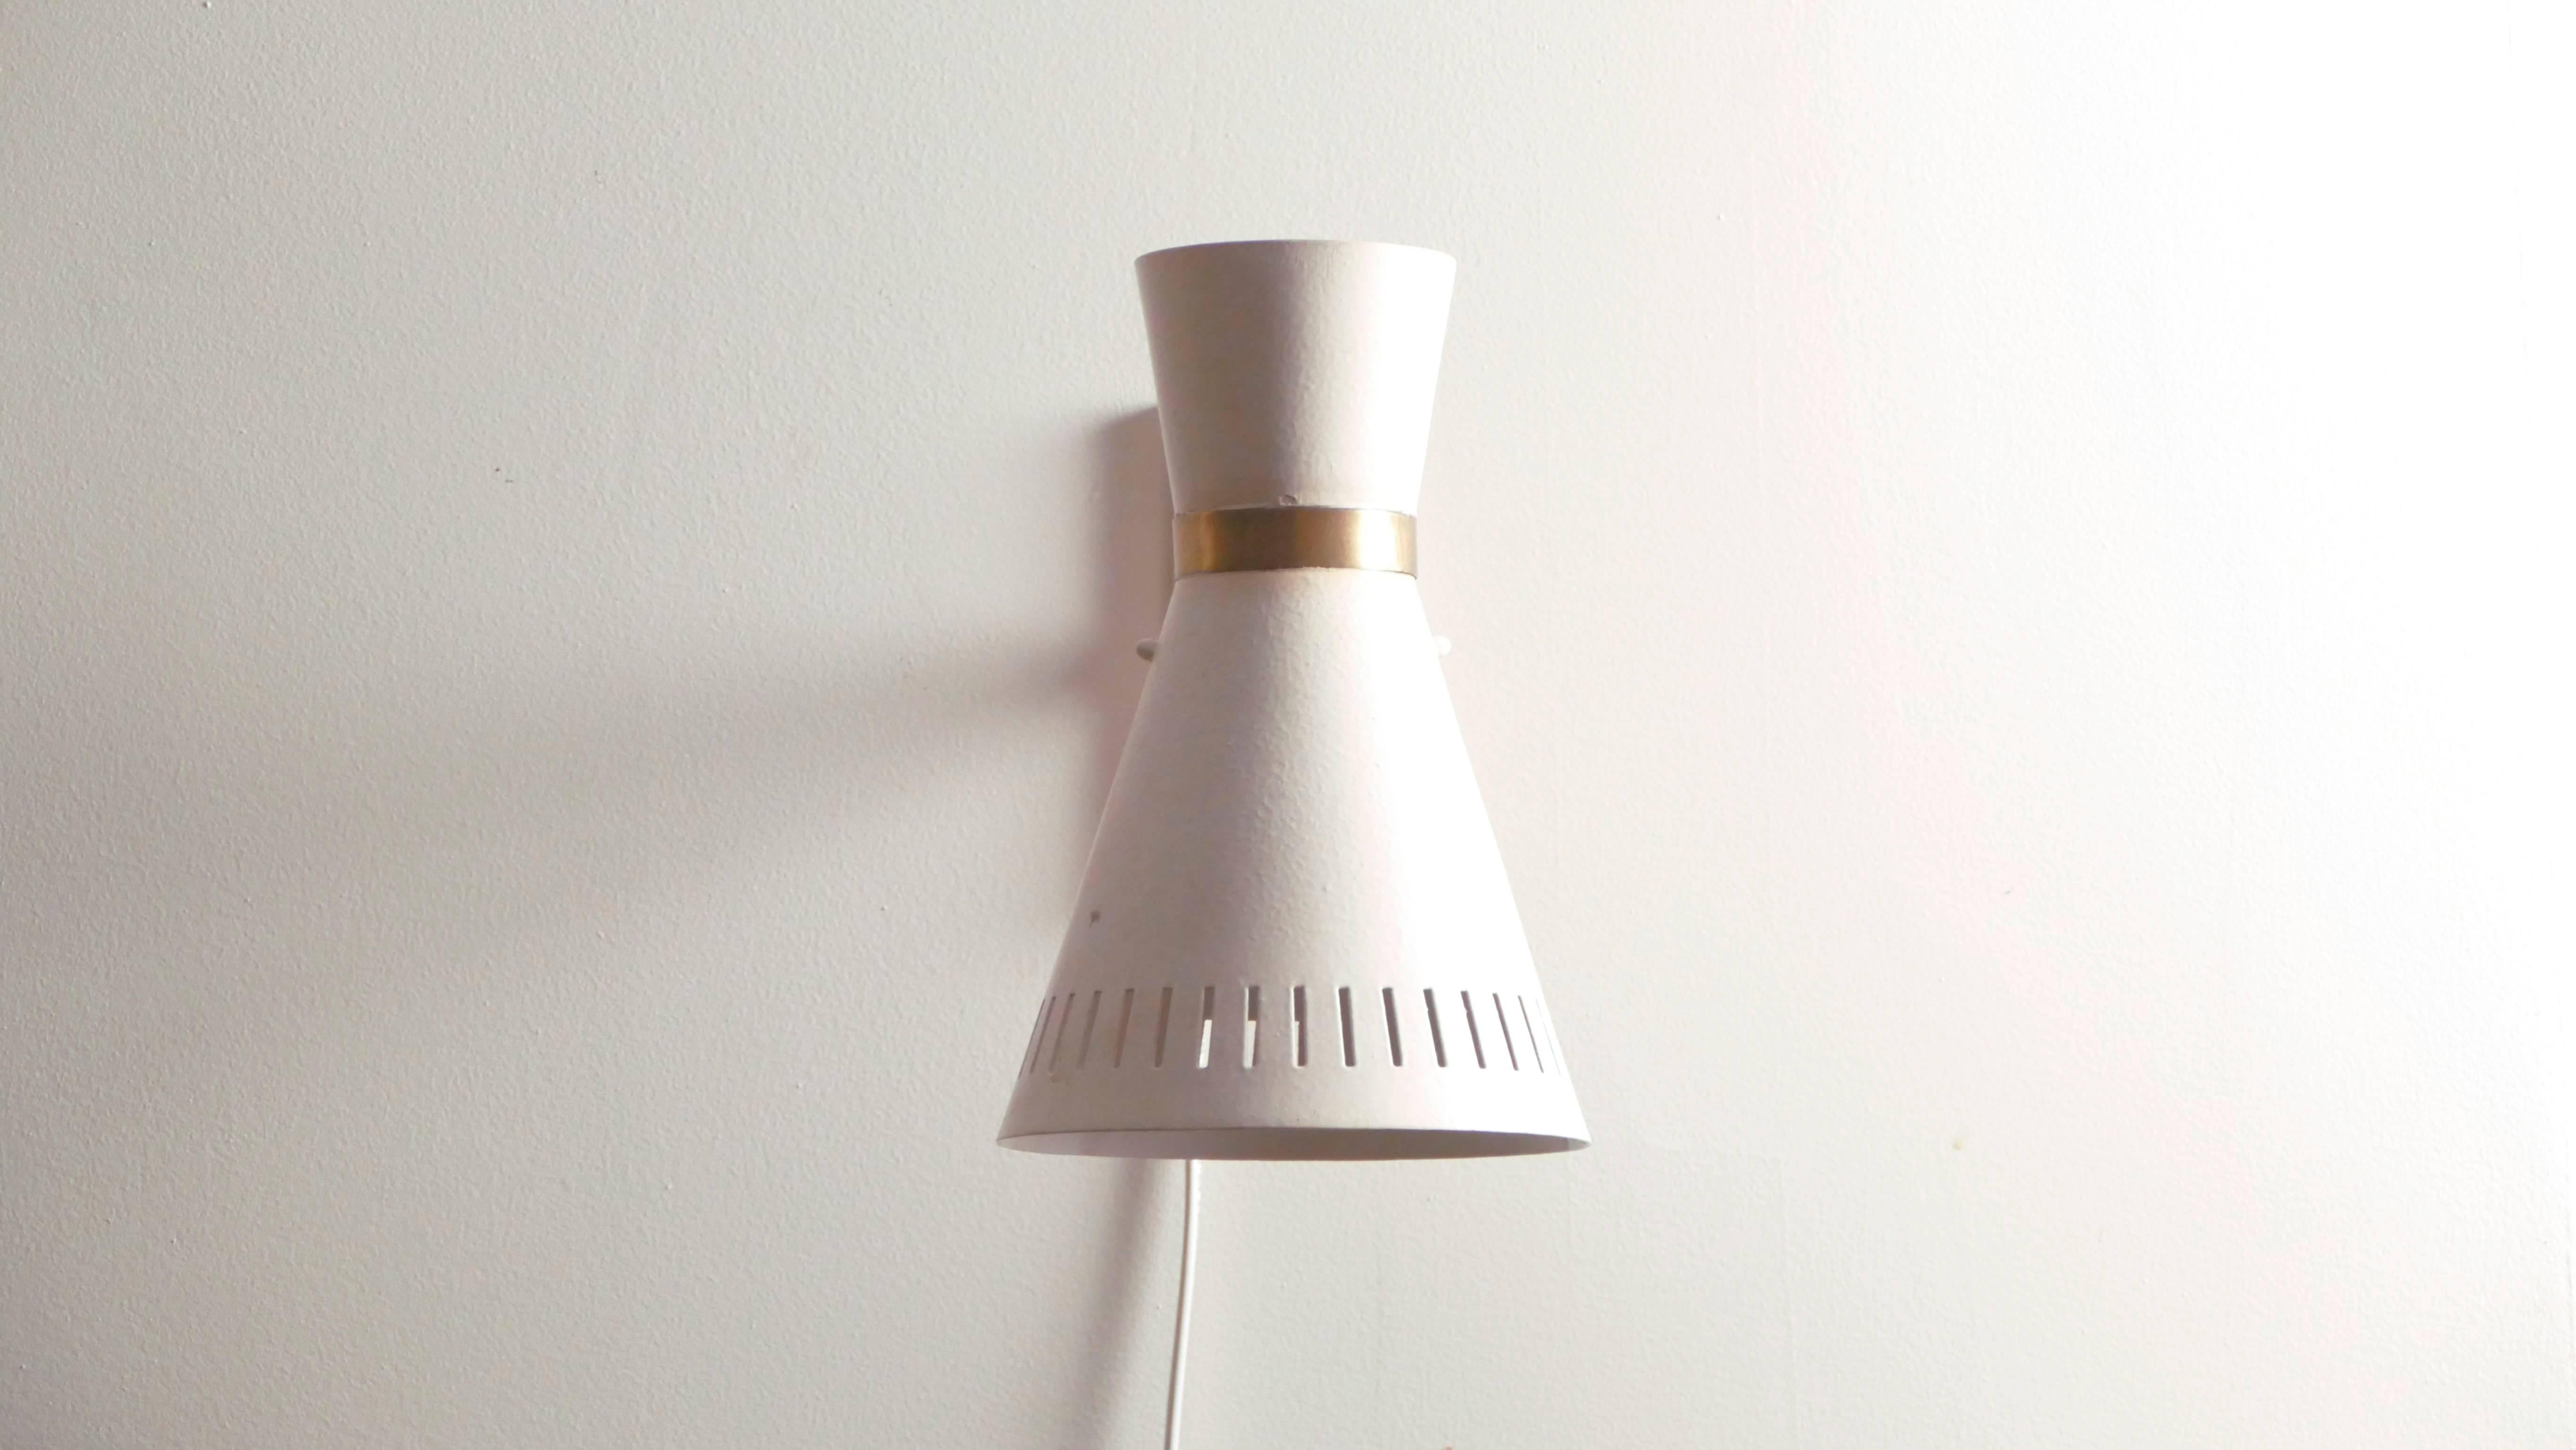 This 1960s sconce was modeled in the style of French designer Pierre Guariche, exhibiting a minimalistic midcentury modern look. The light fixture is made of brass and white metal and shaped in an uneven diabolo form that feels at once timeless and